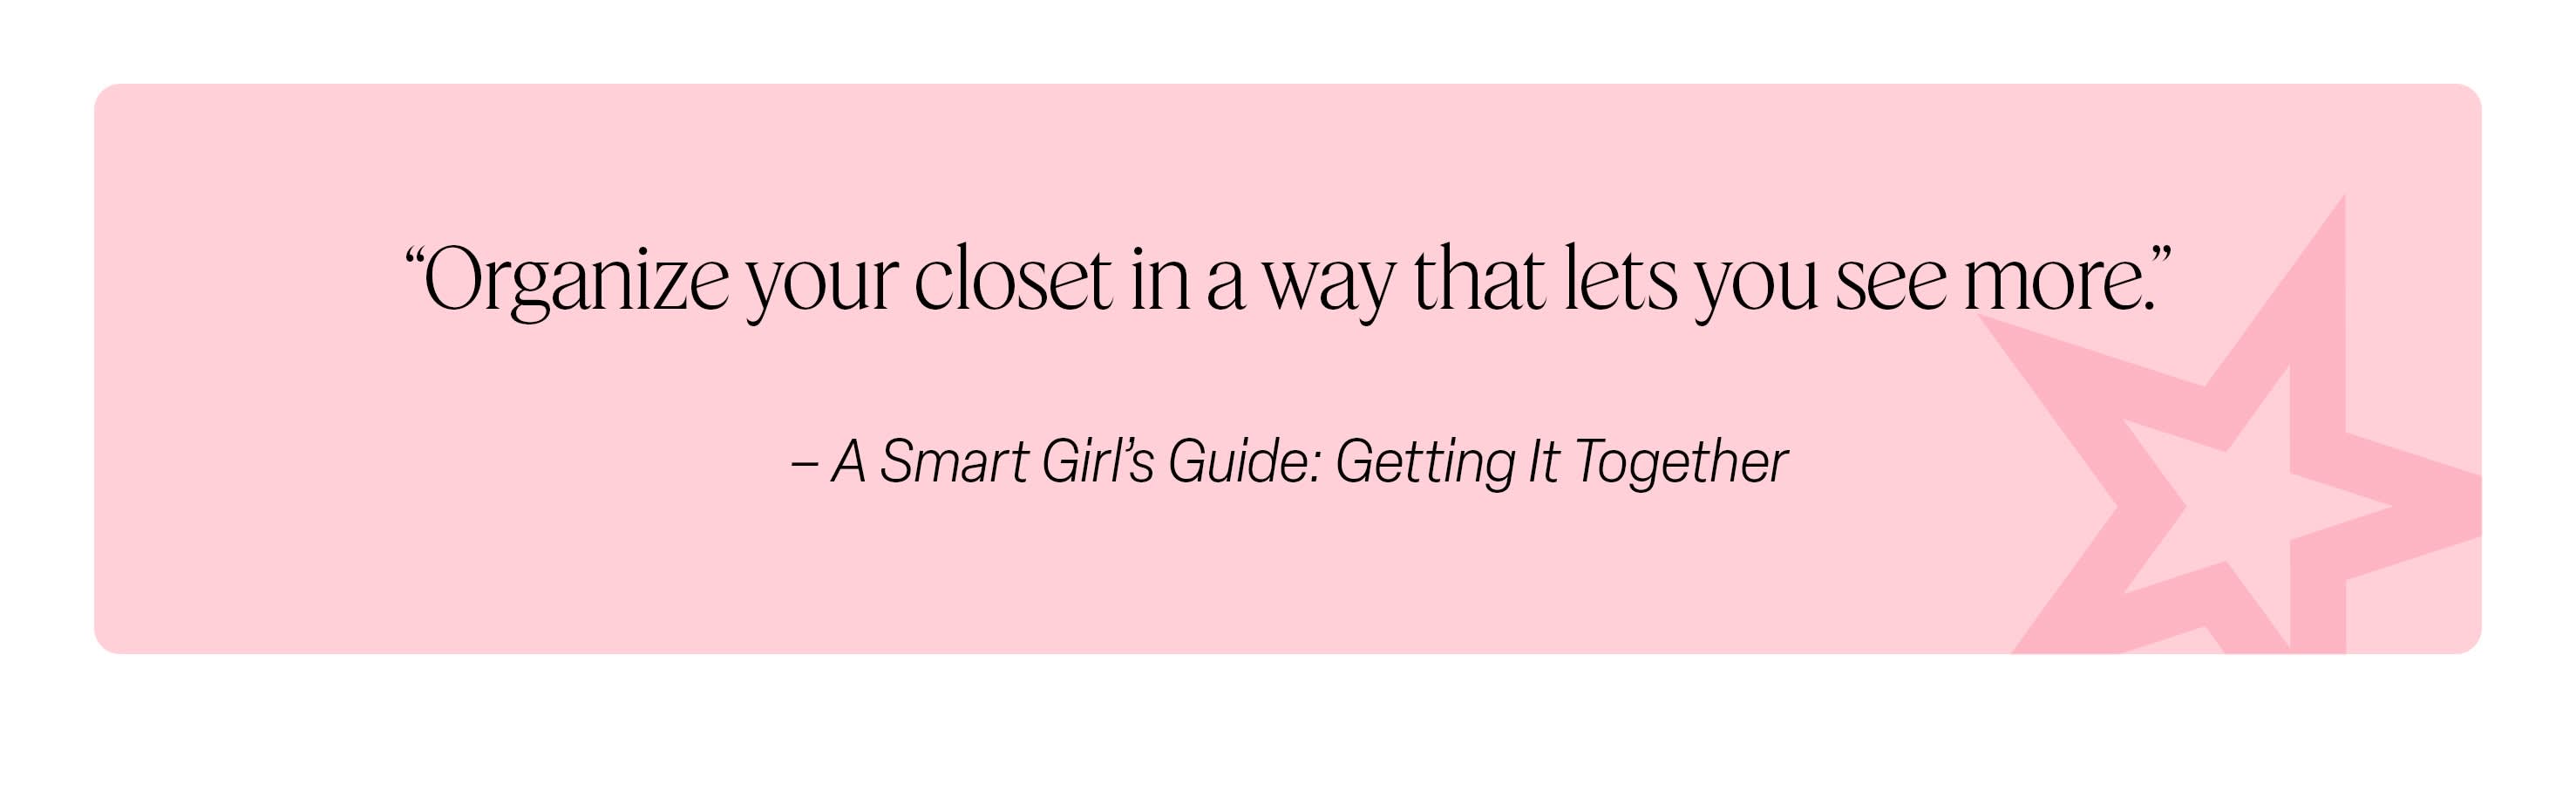 Quote from A Smart Girl's Guide: Getting it Together